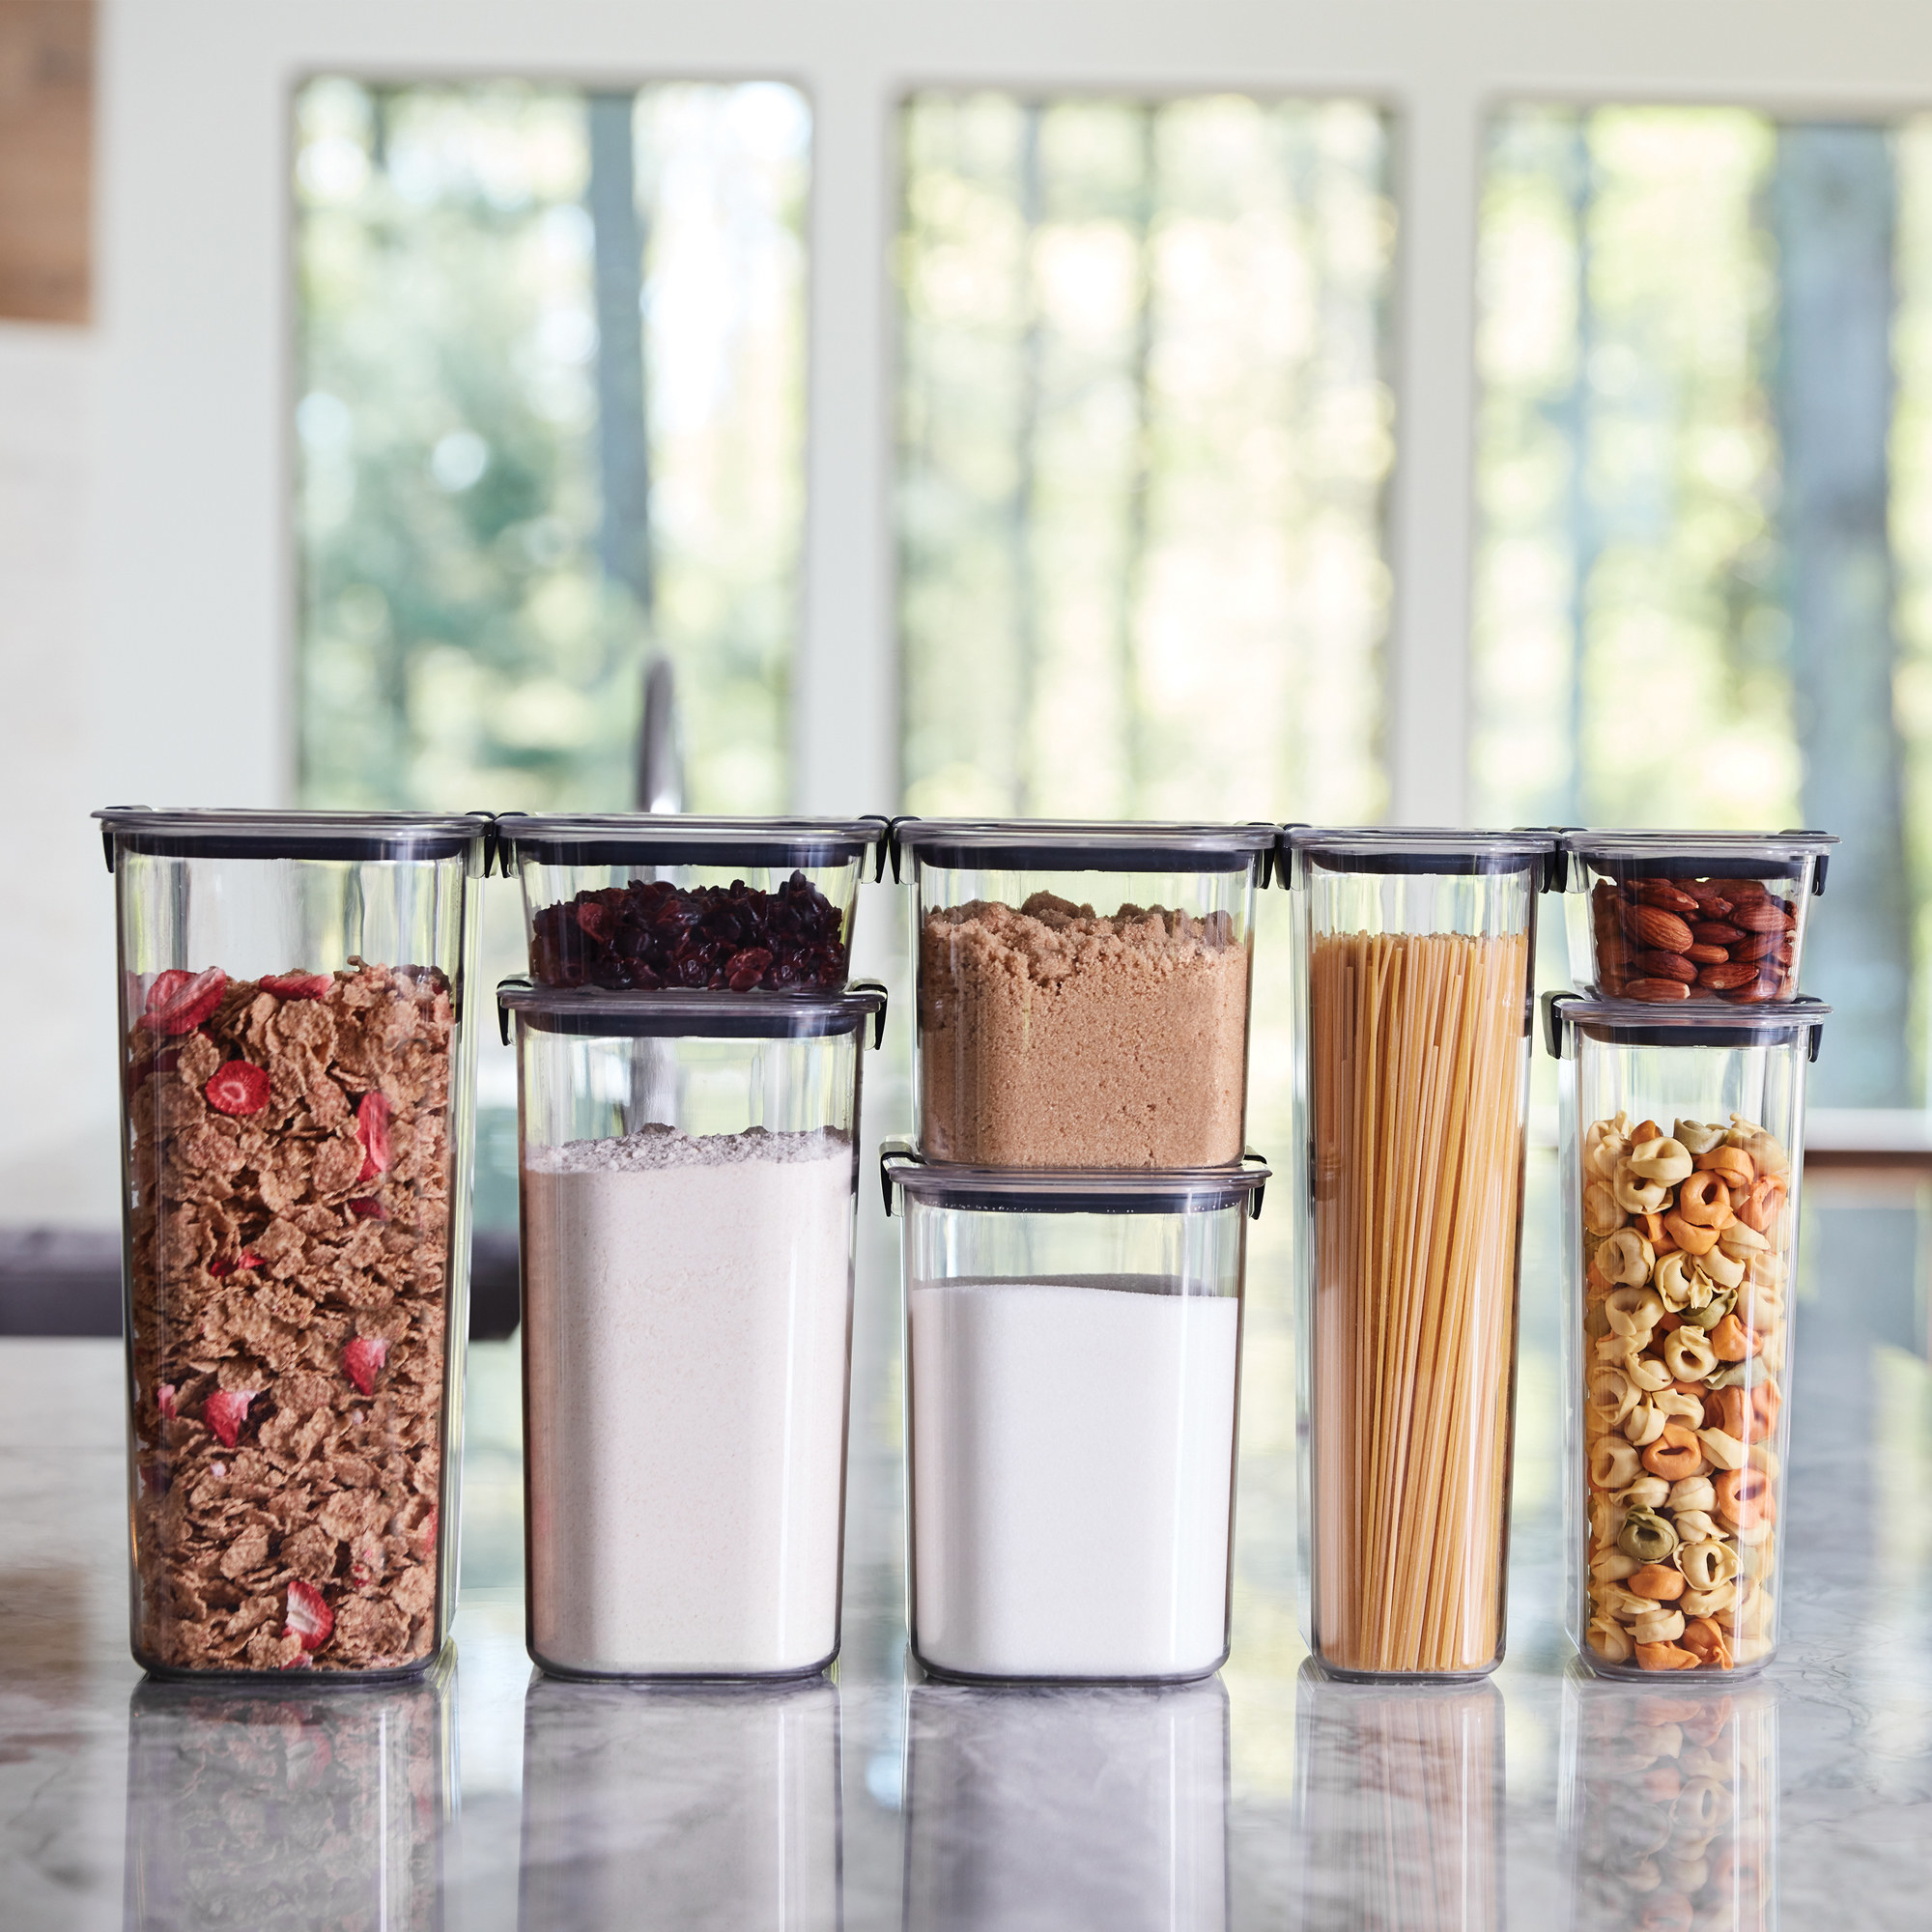 The containers filled with food on a counter